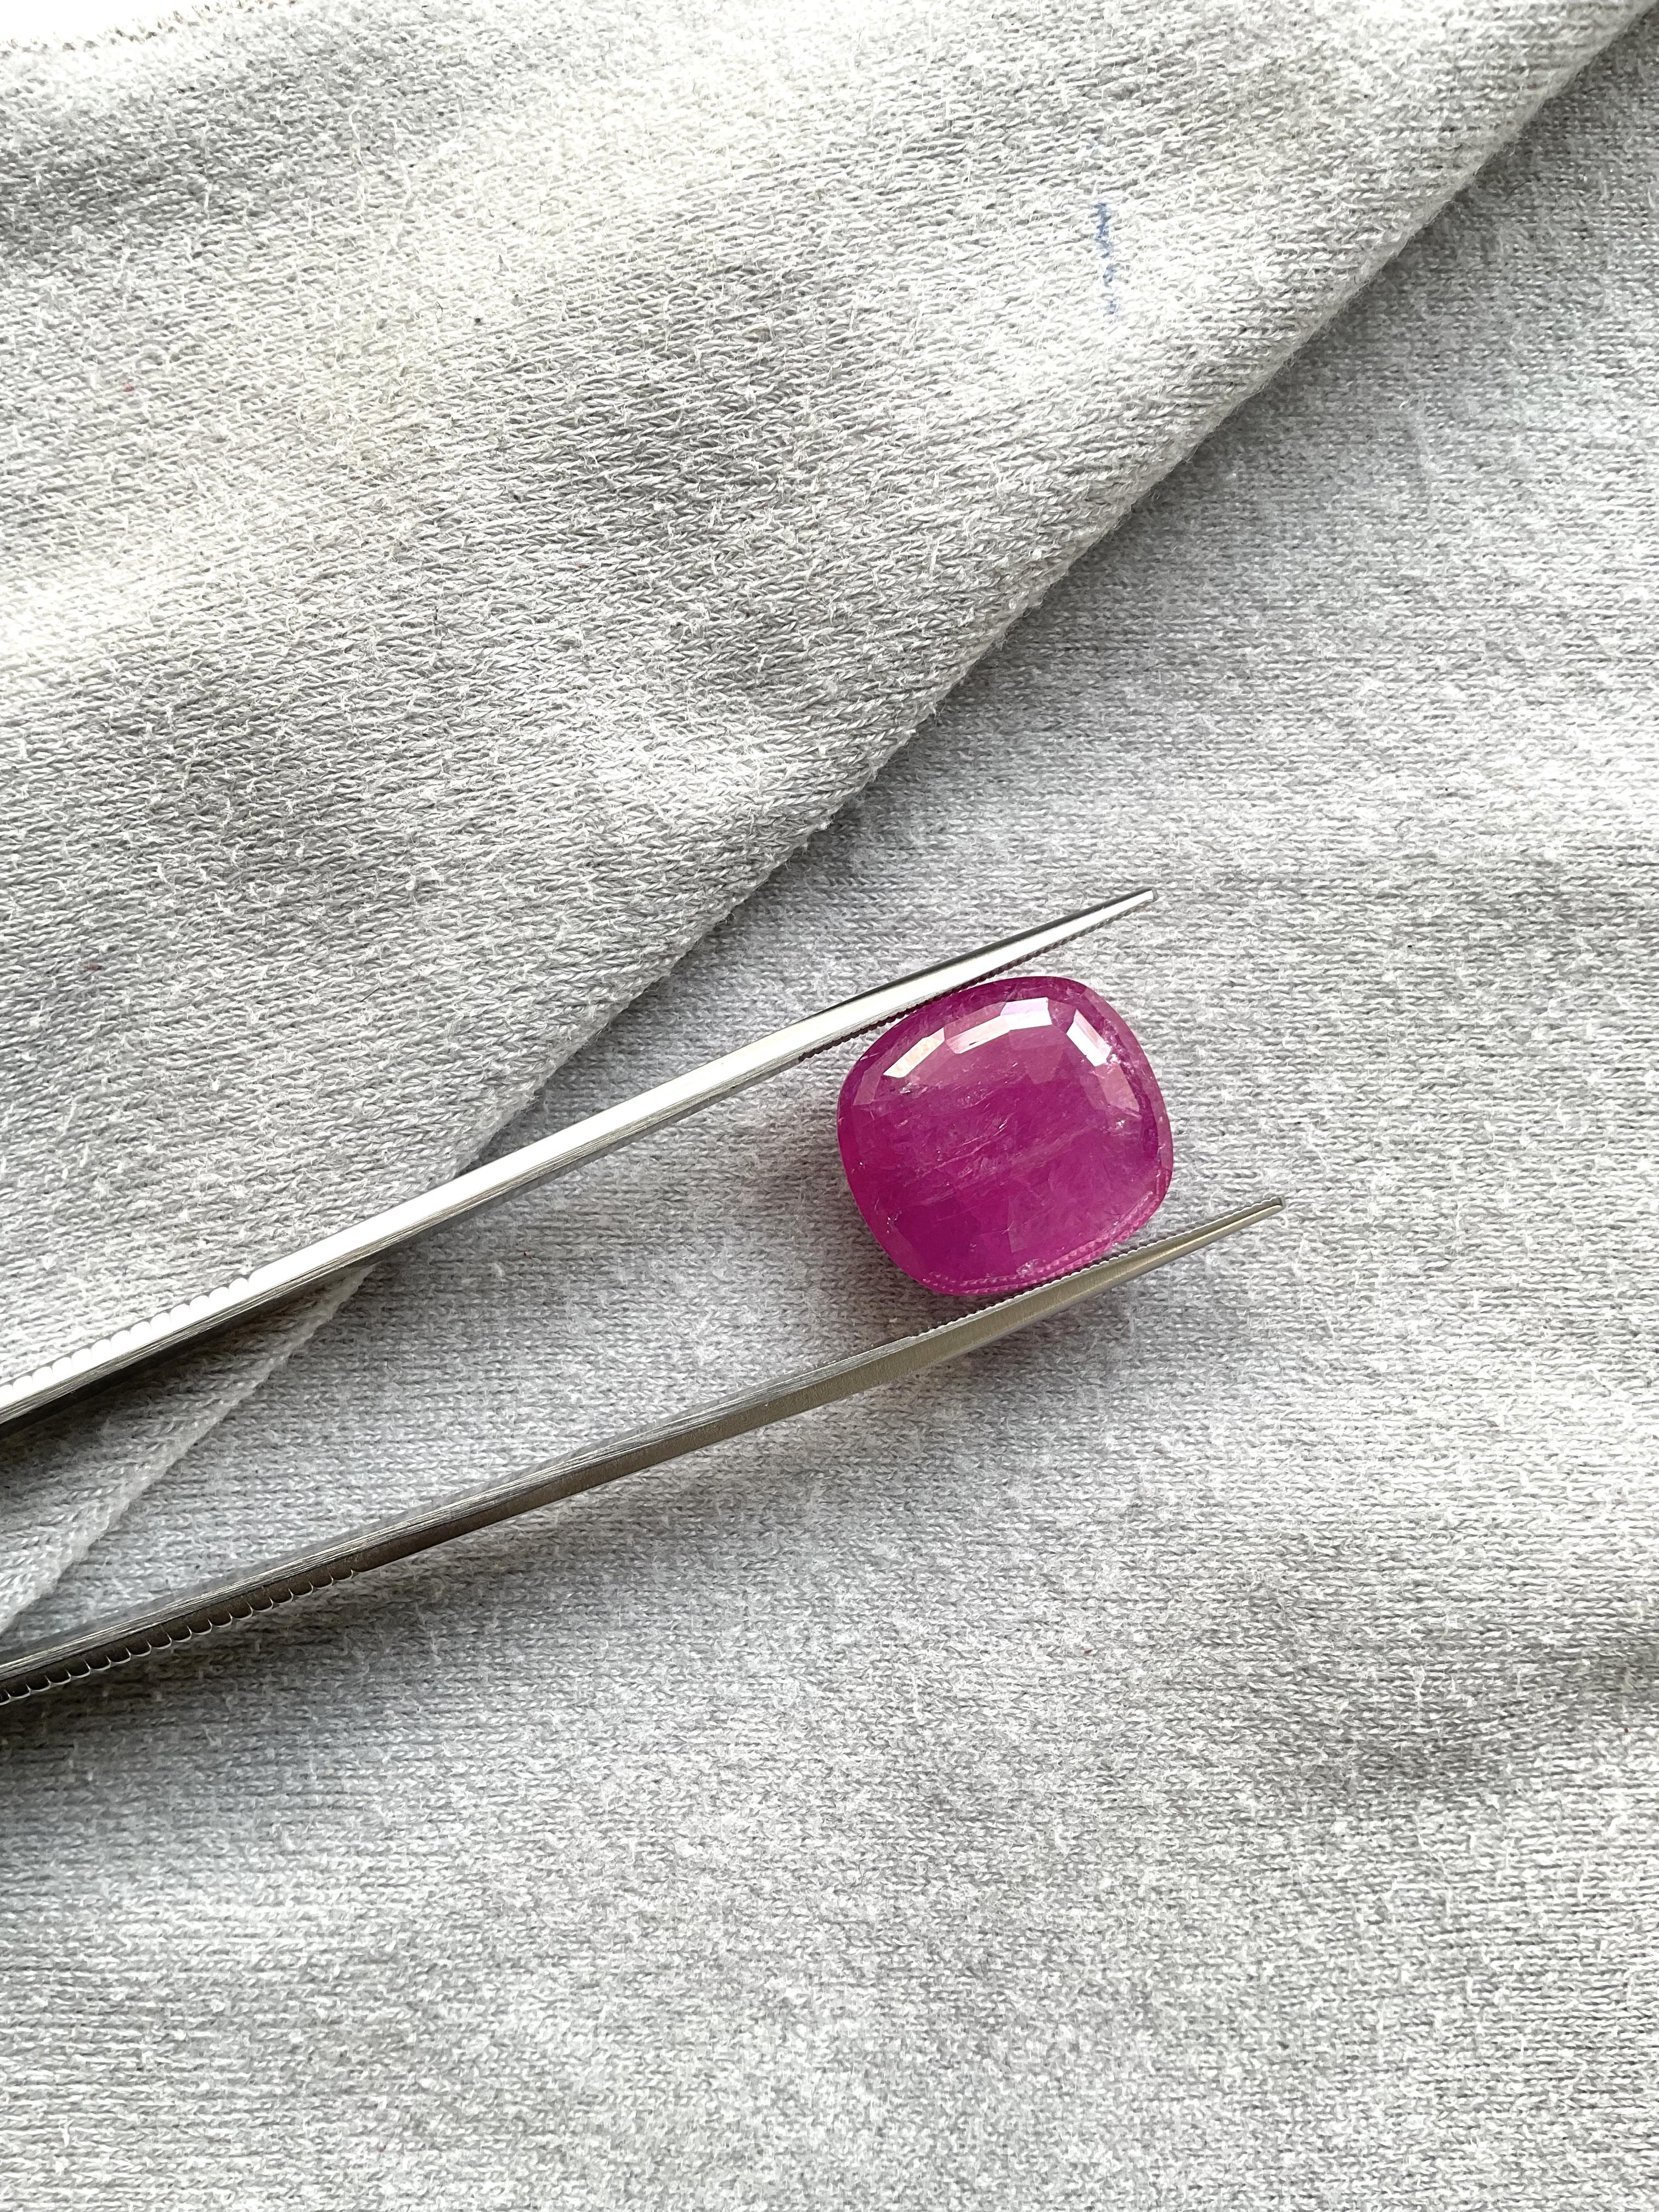 Cushion Cut Certified 13.11 Carats Mozambique Ruby Cushion Faceted Cut No Heat Natural Gem For Sale